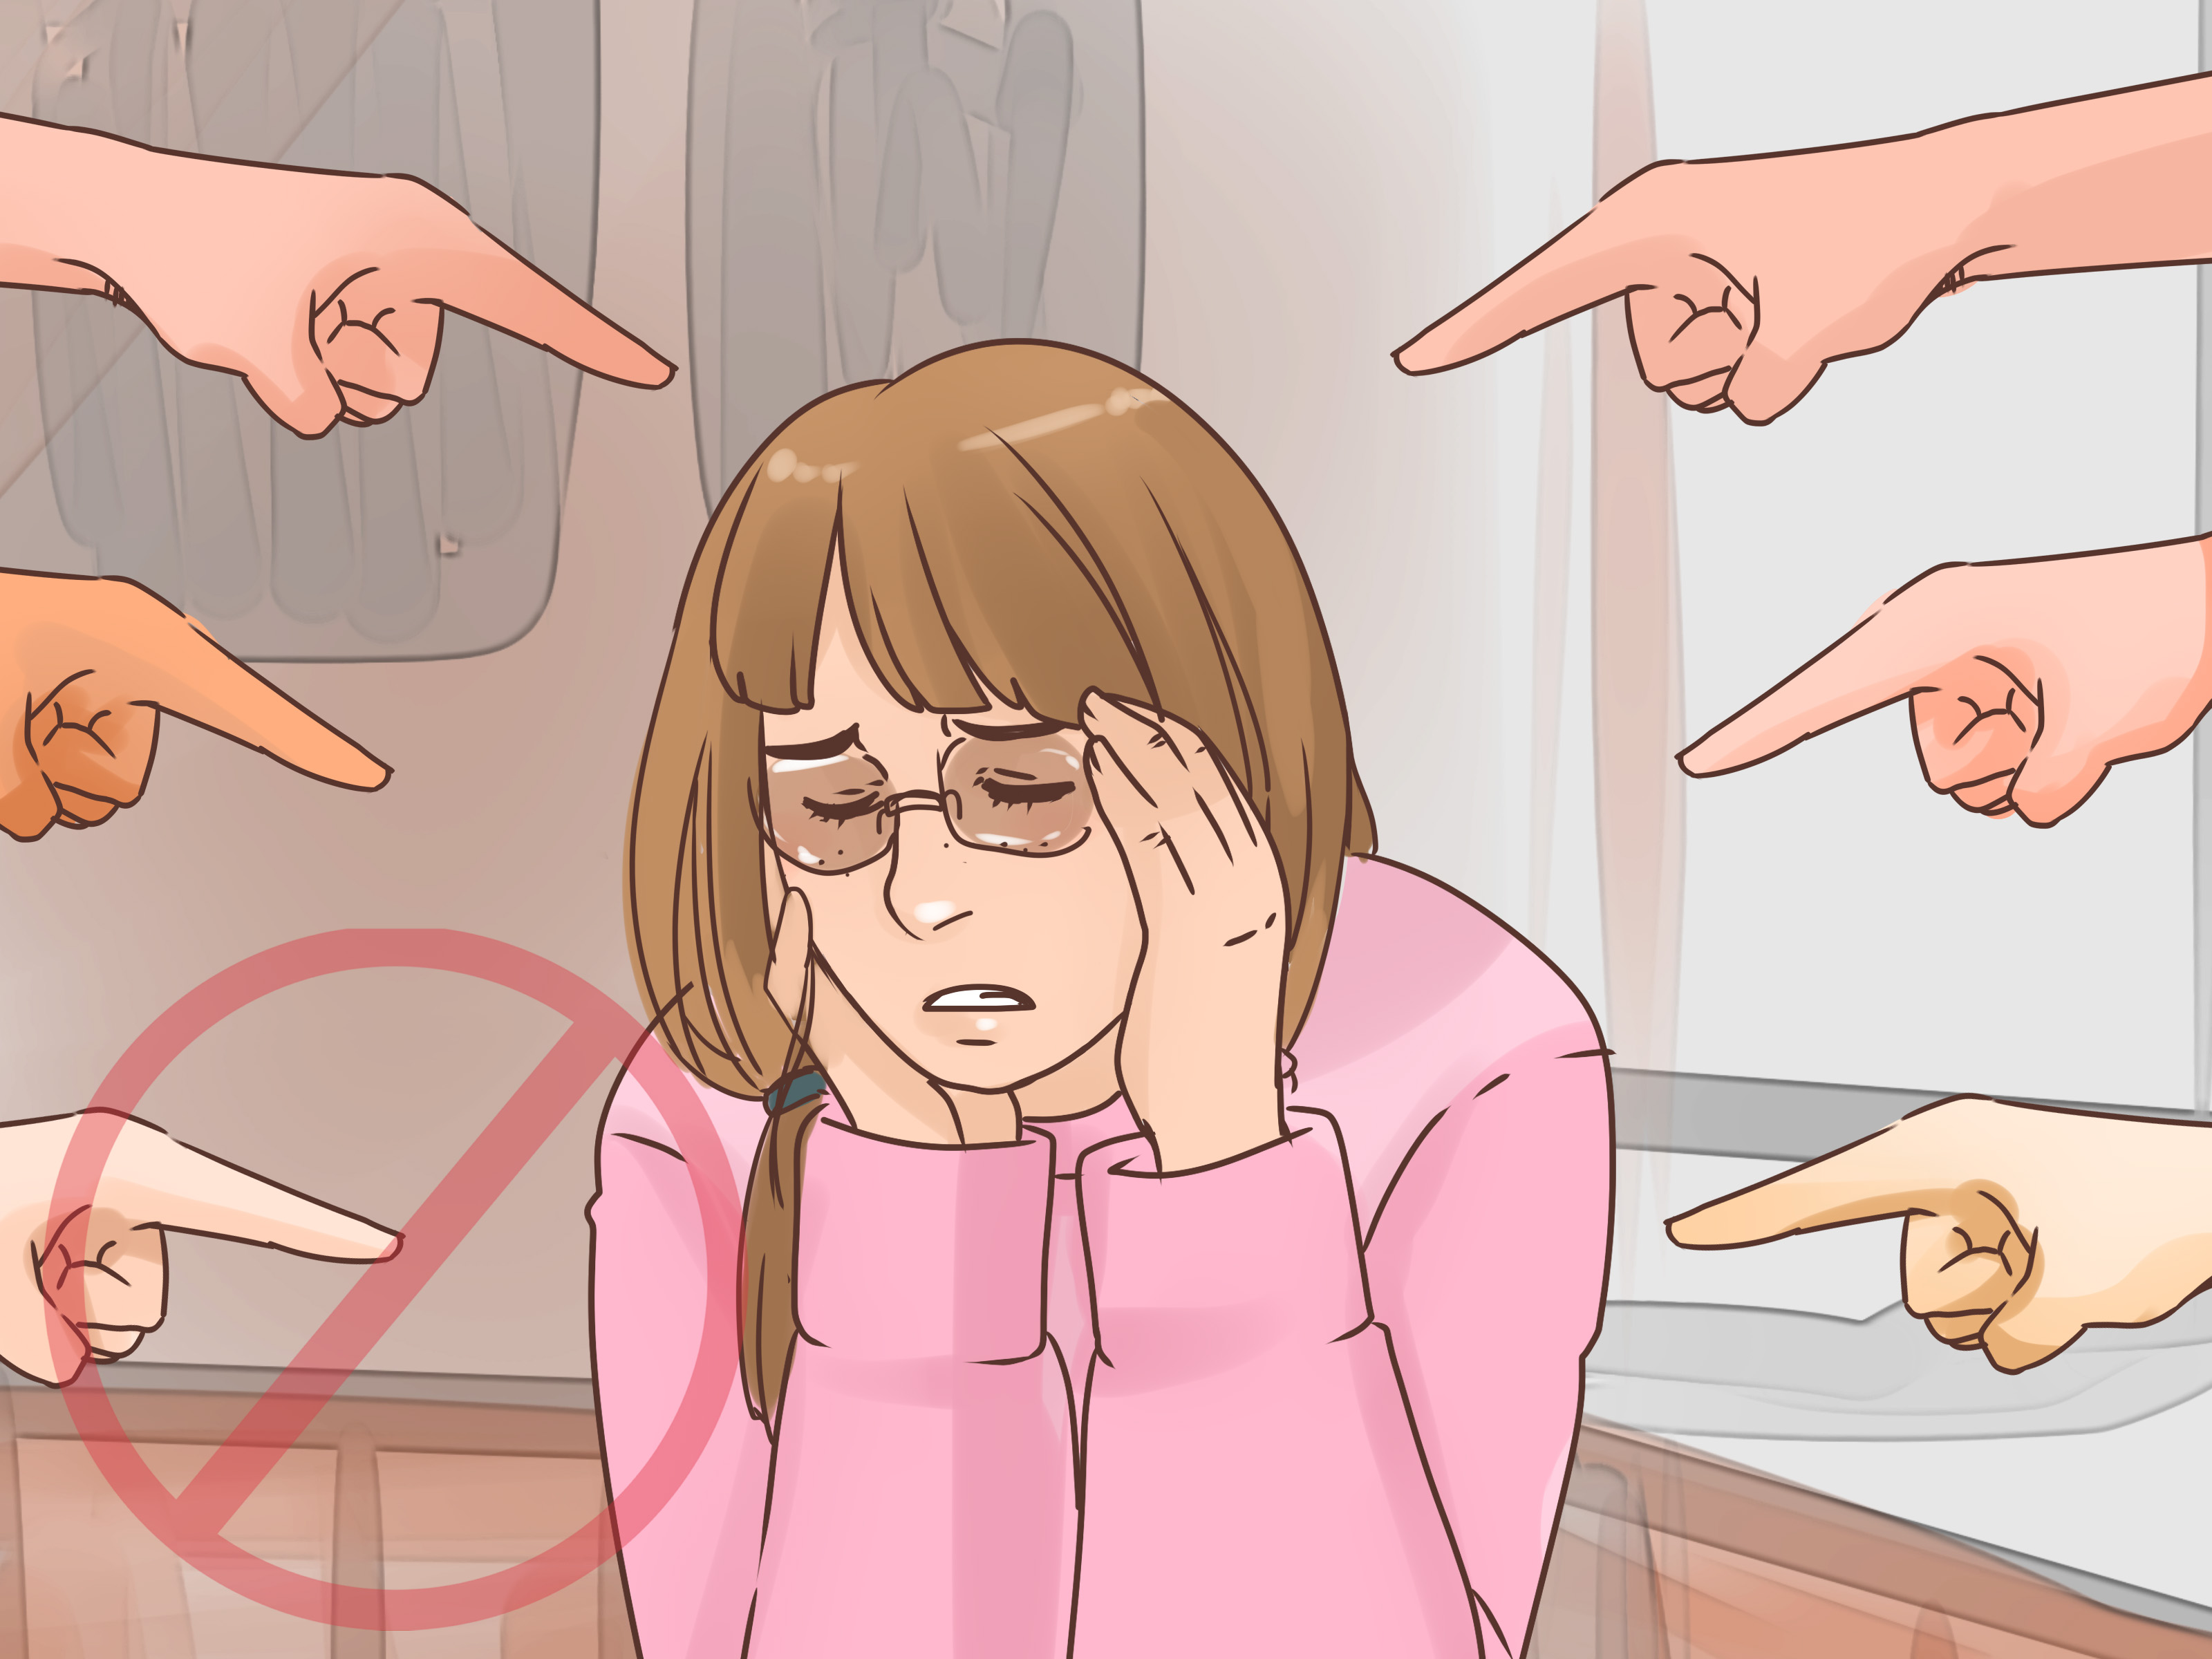 3 Ways to Stop Thinking About Him - wikiHow